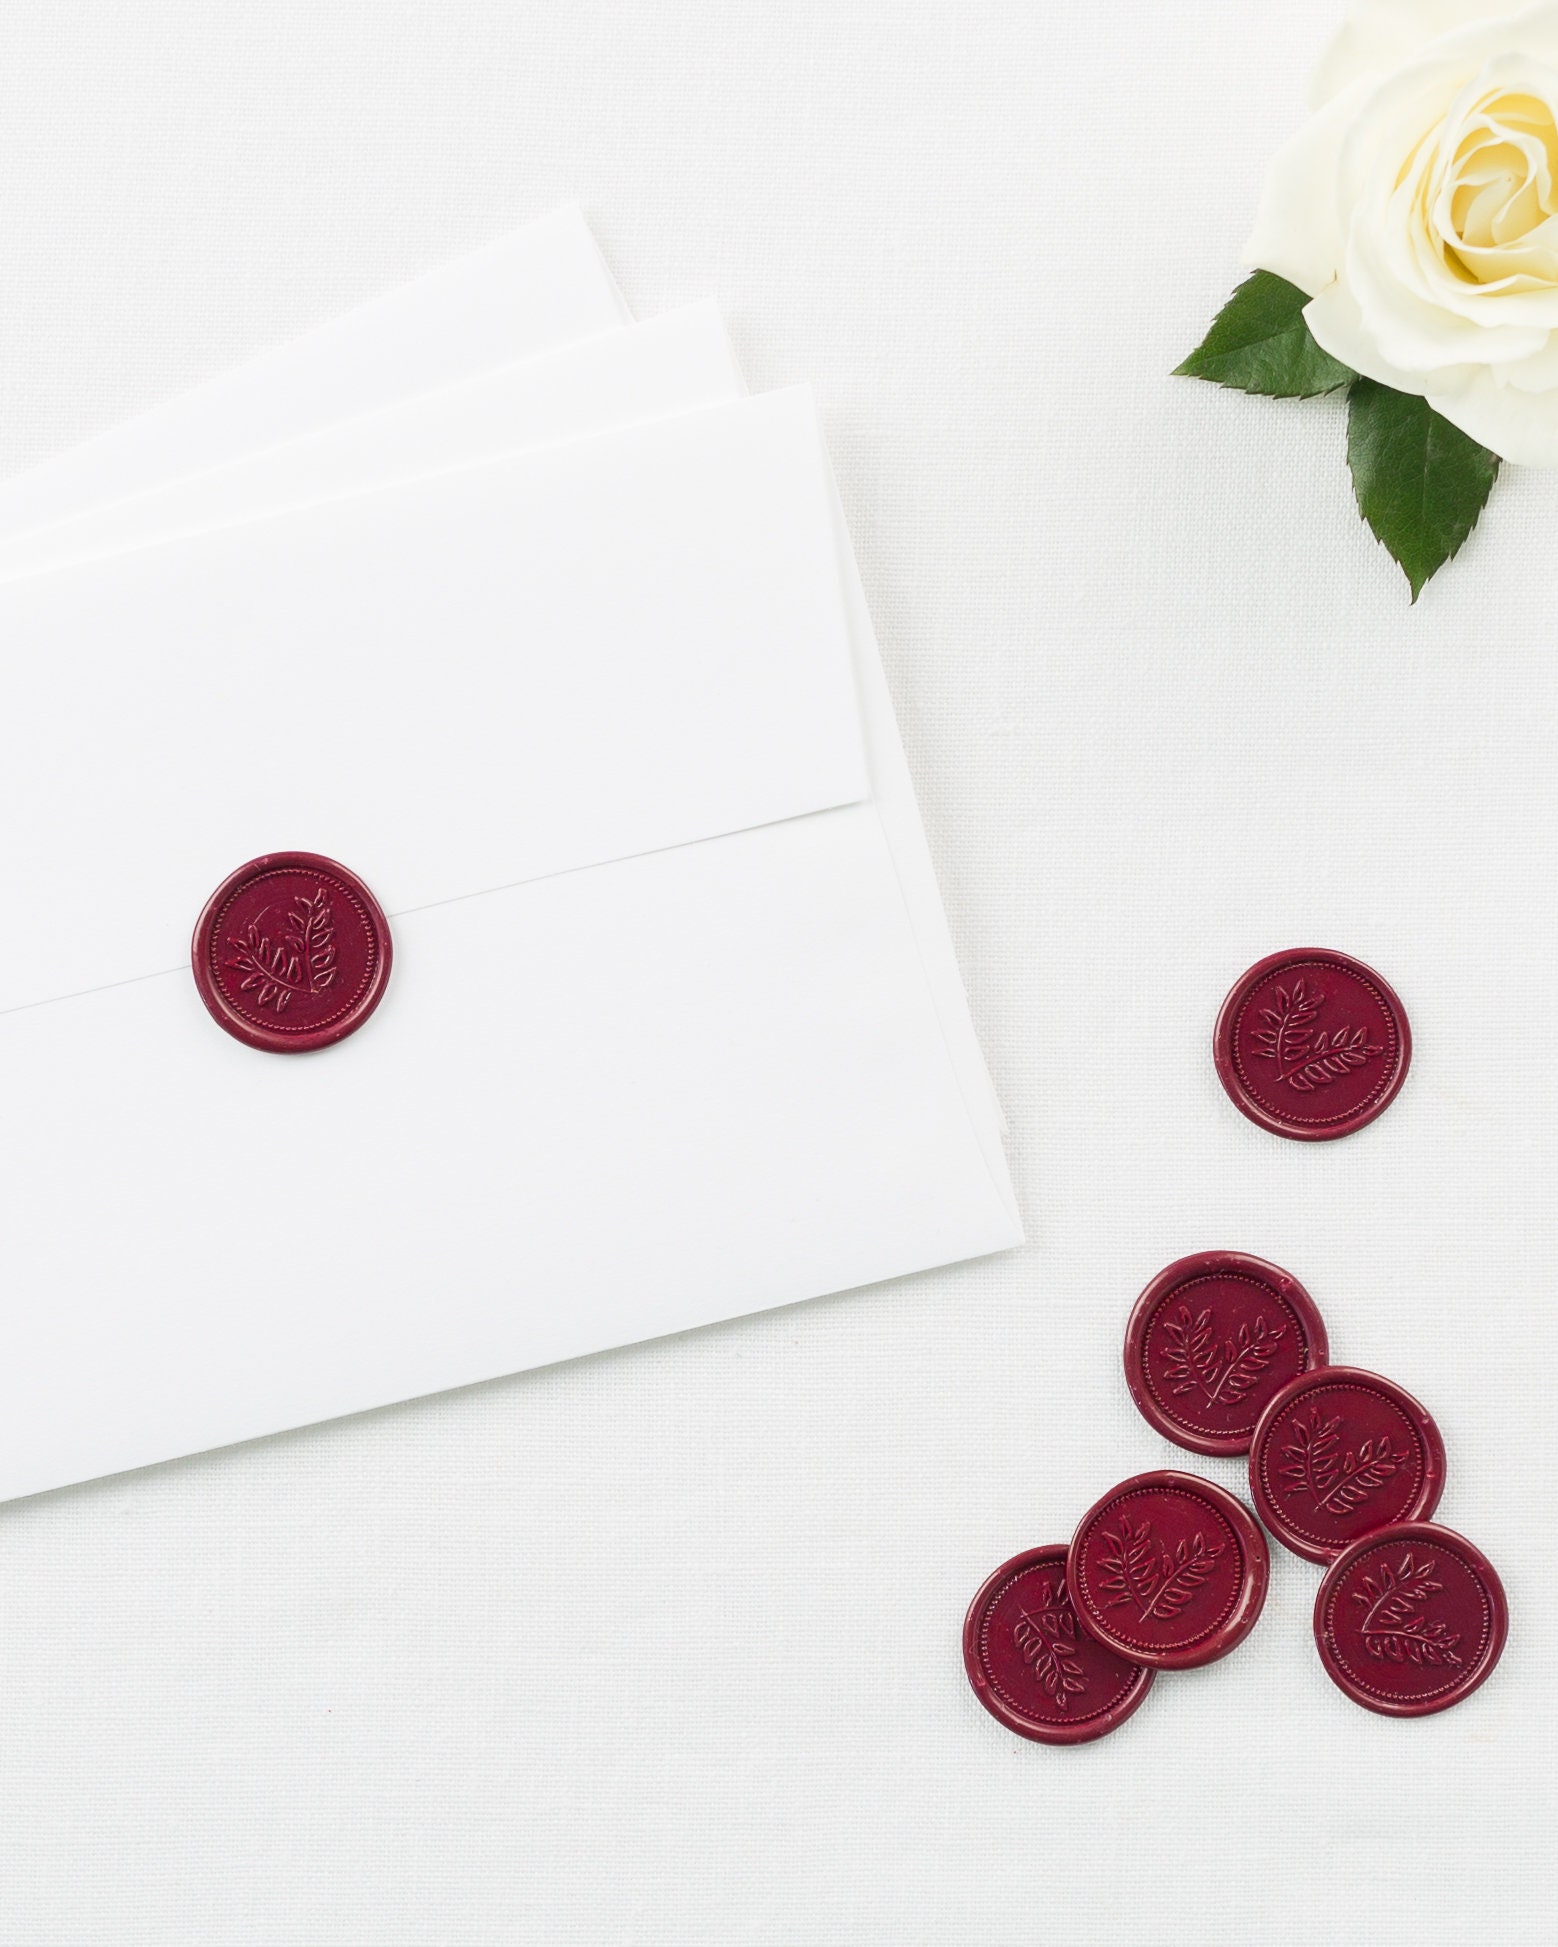 Wax Seal Stamps, White Wax Seal, Initials Wax Seal Stamp Wedding Invitation Wax  Seal, White Wax Seal Stickers, Initials Wax Seal Stamp 